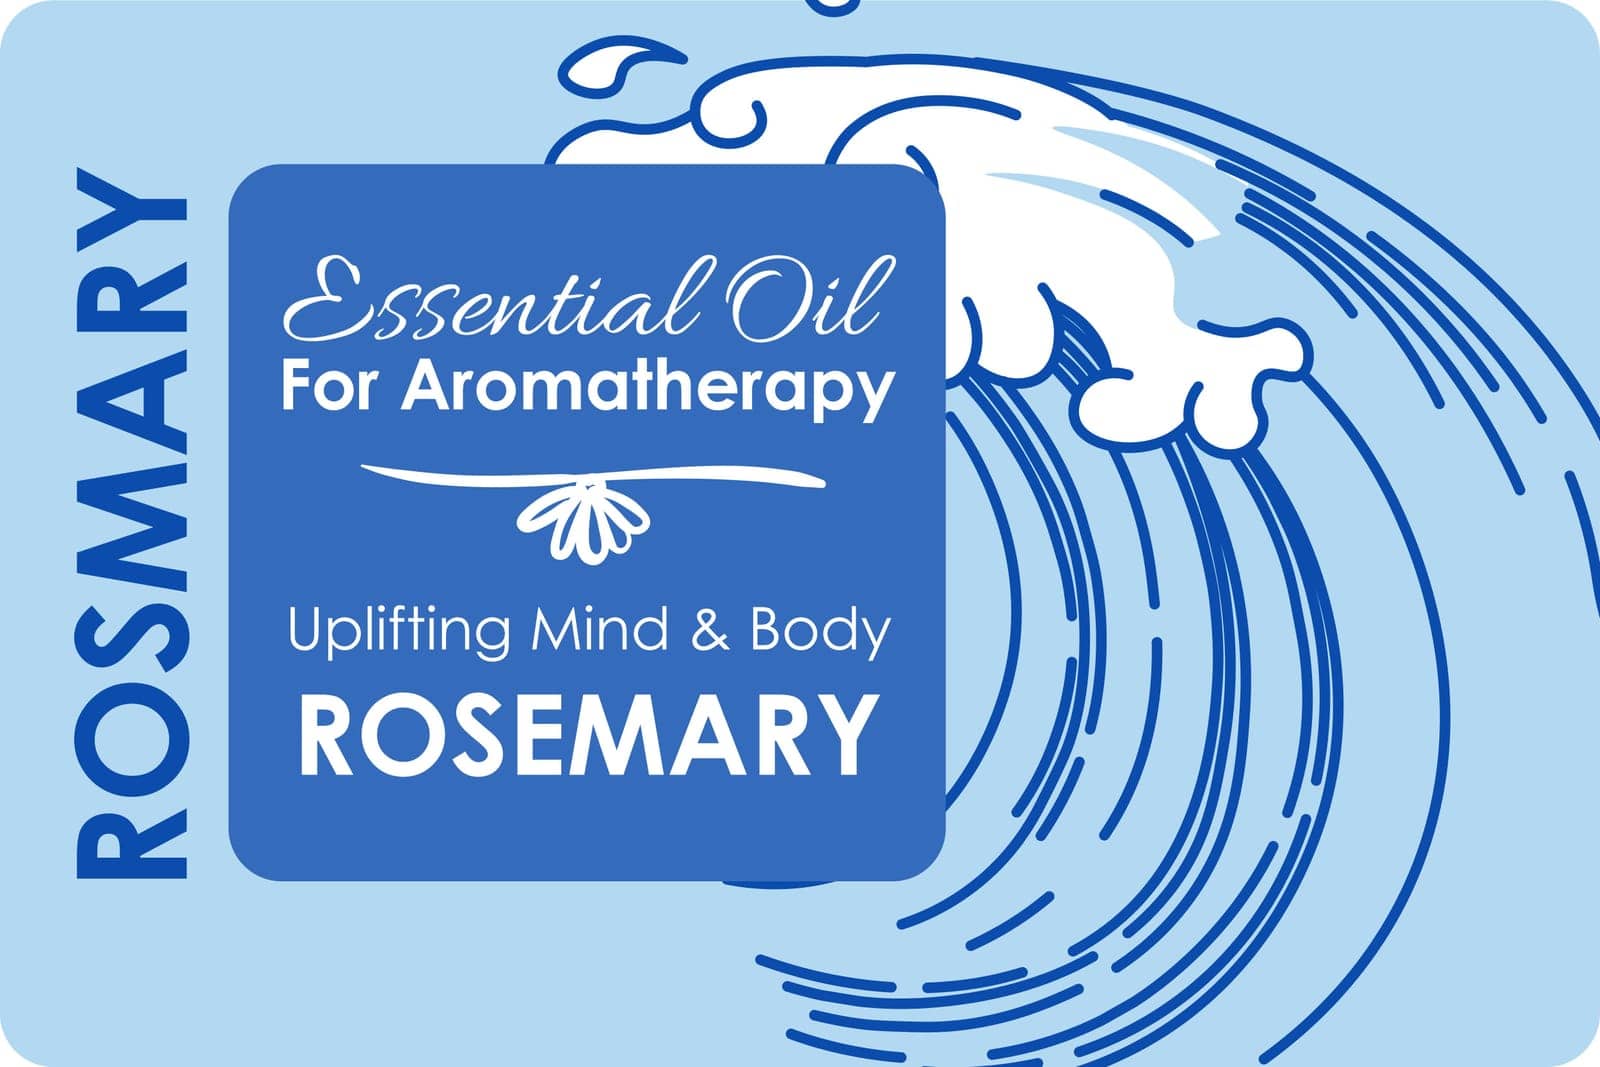 Essential oil for aromatherapy rosemary uplifting mind and body. Ocean or sea wave, aromatic scent and fragrance for massage, health and wellbeing, organic products for care. Vector in flat style